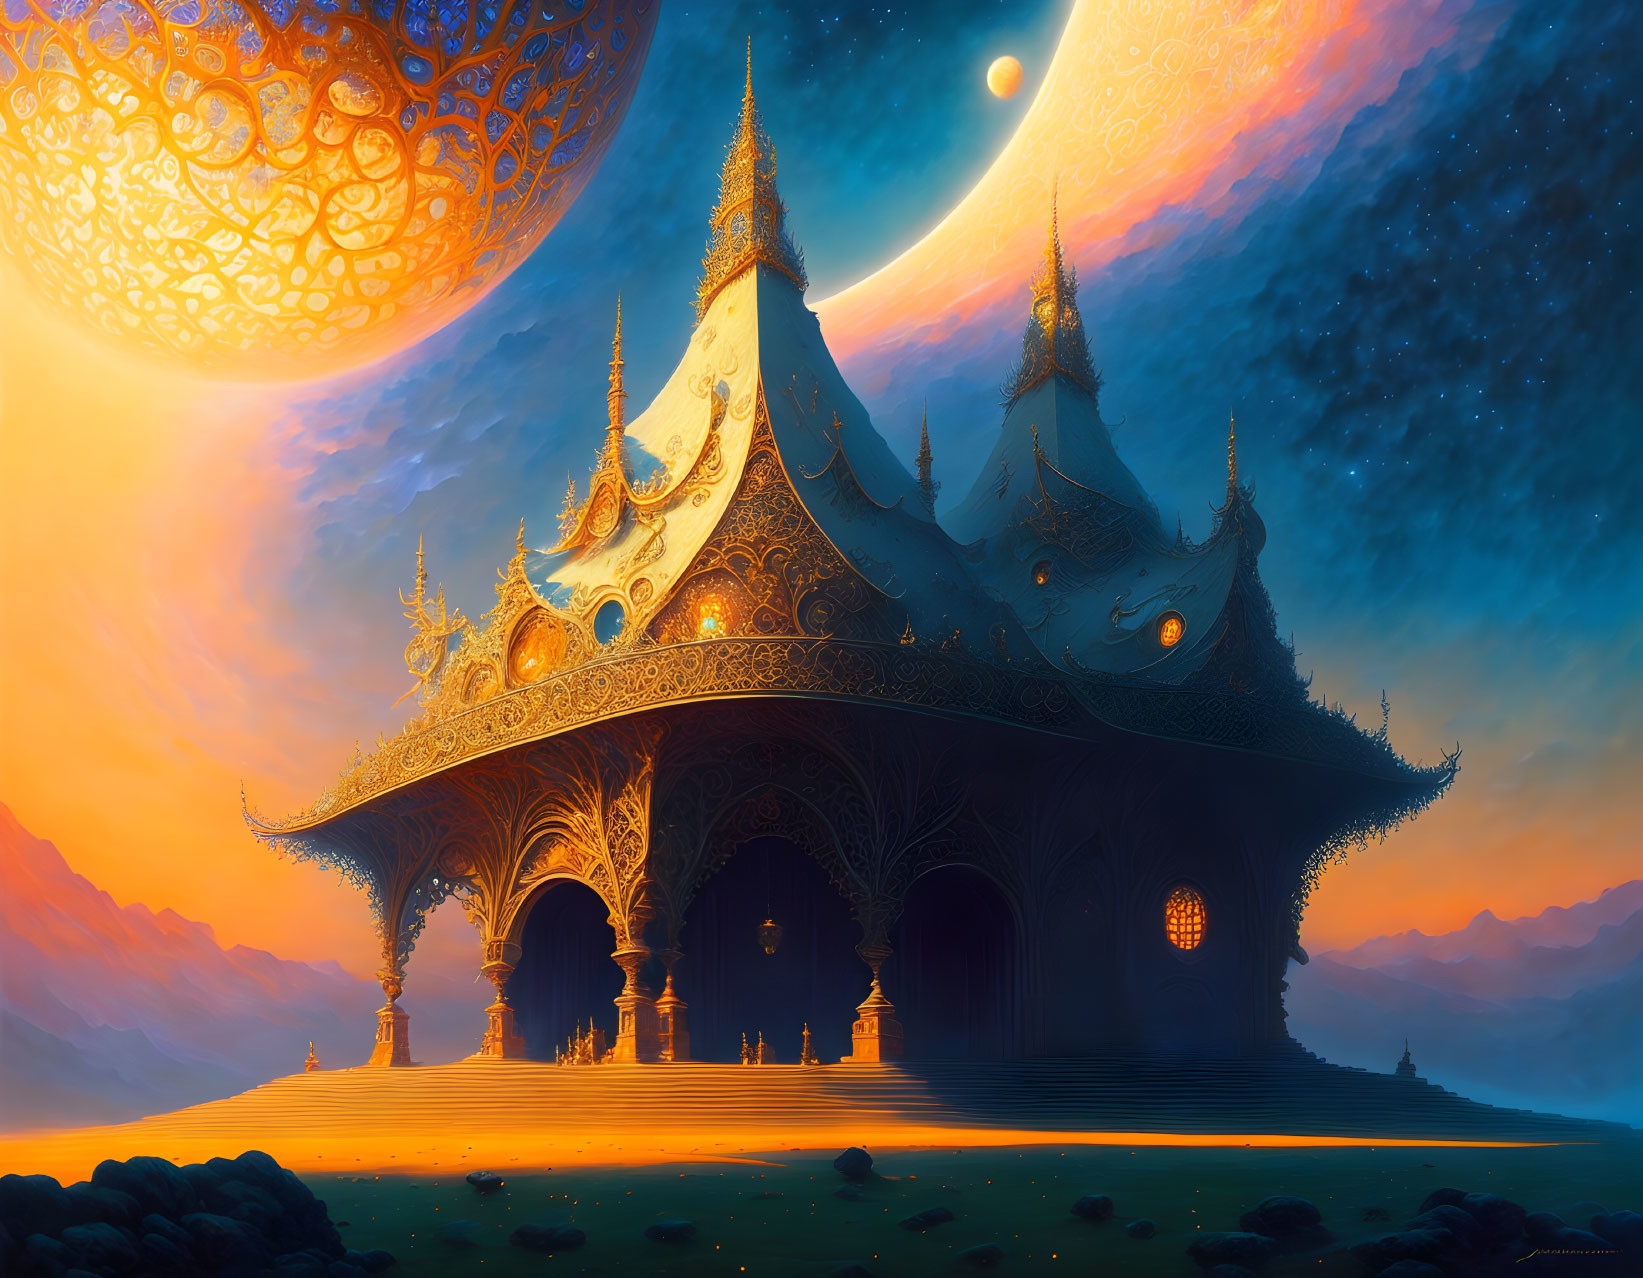 Intricate fantasy temple under celestial sky with large moon and swirling stars